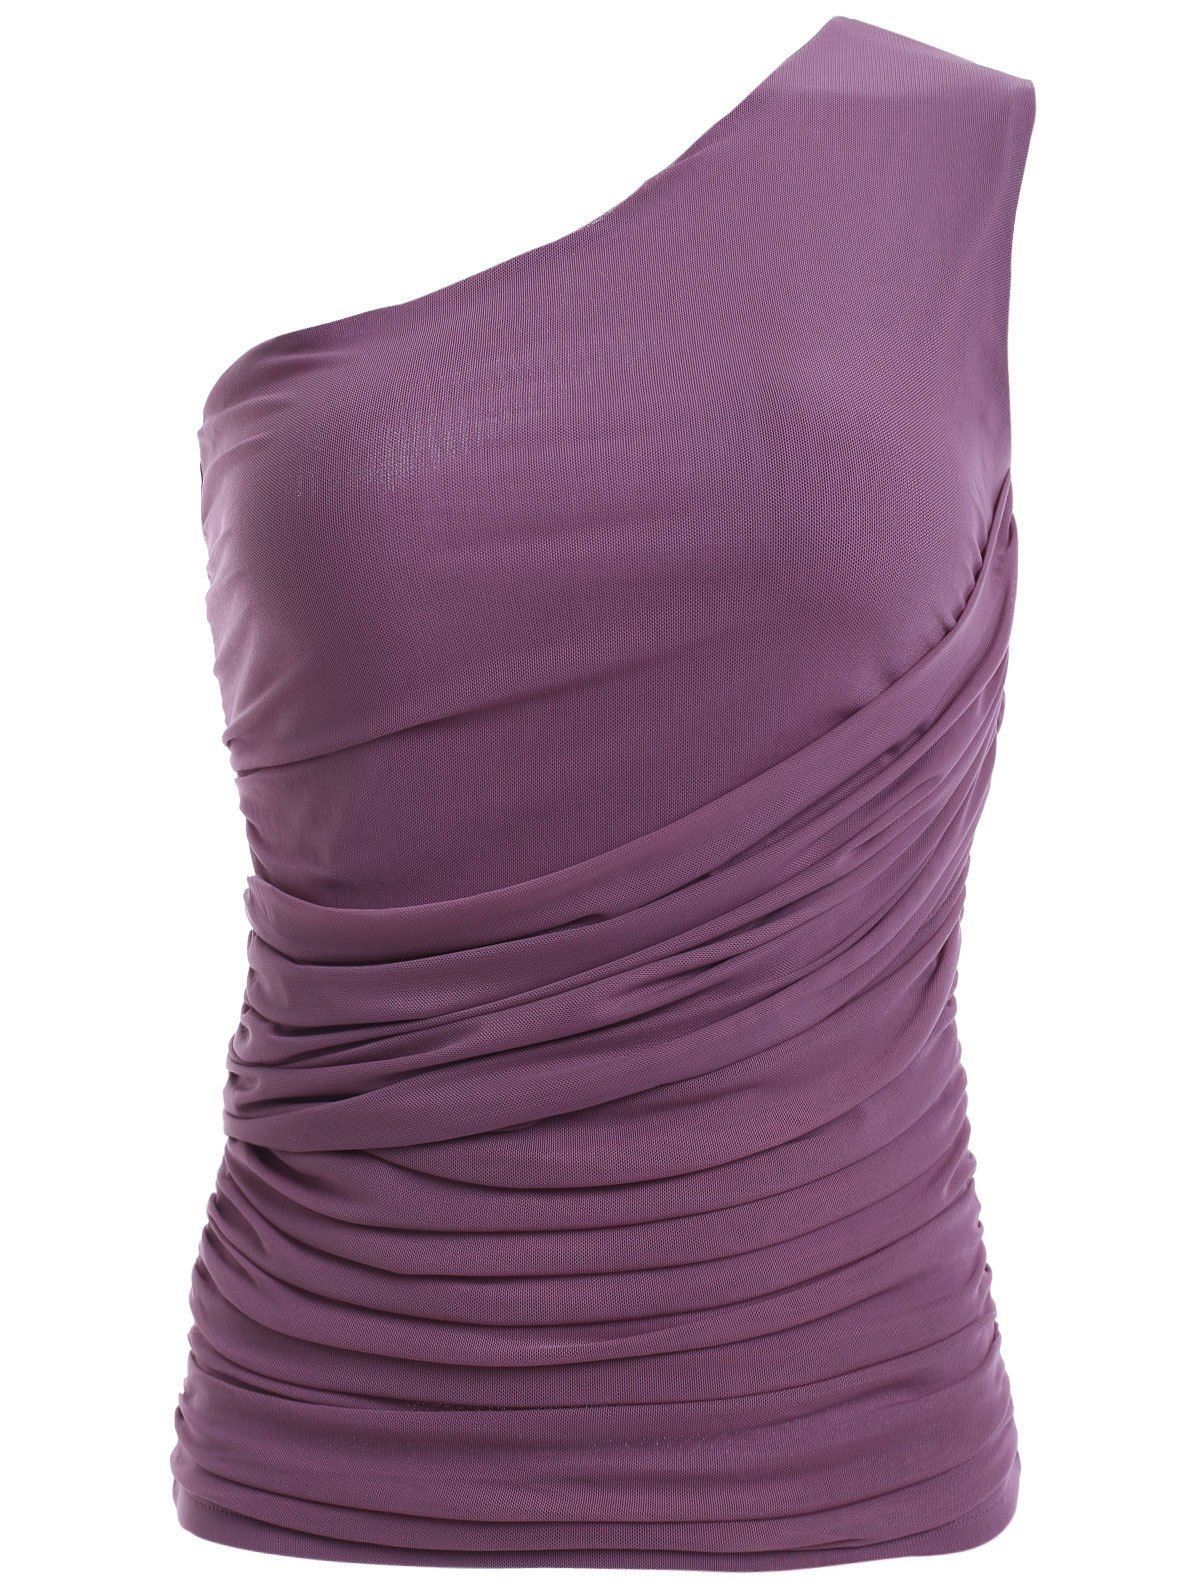 

Stylish Women's Solid Color Ruffles Voile One-Shoulder Top, Purple